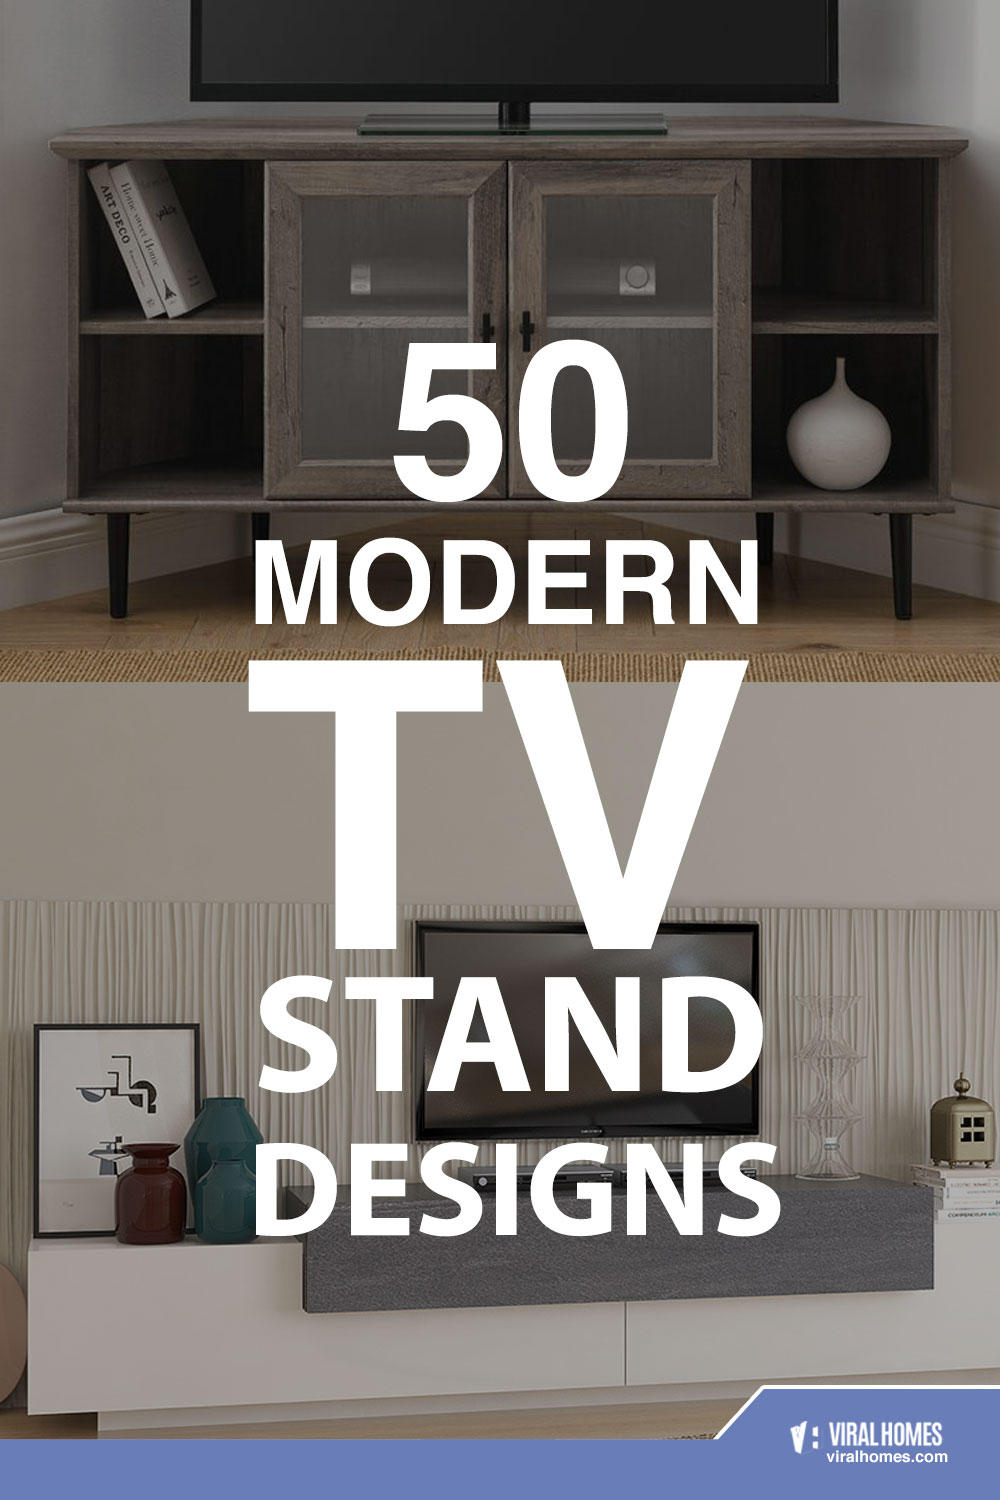 Modern TV Stand Designs to Organize Your Home